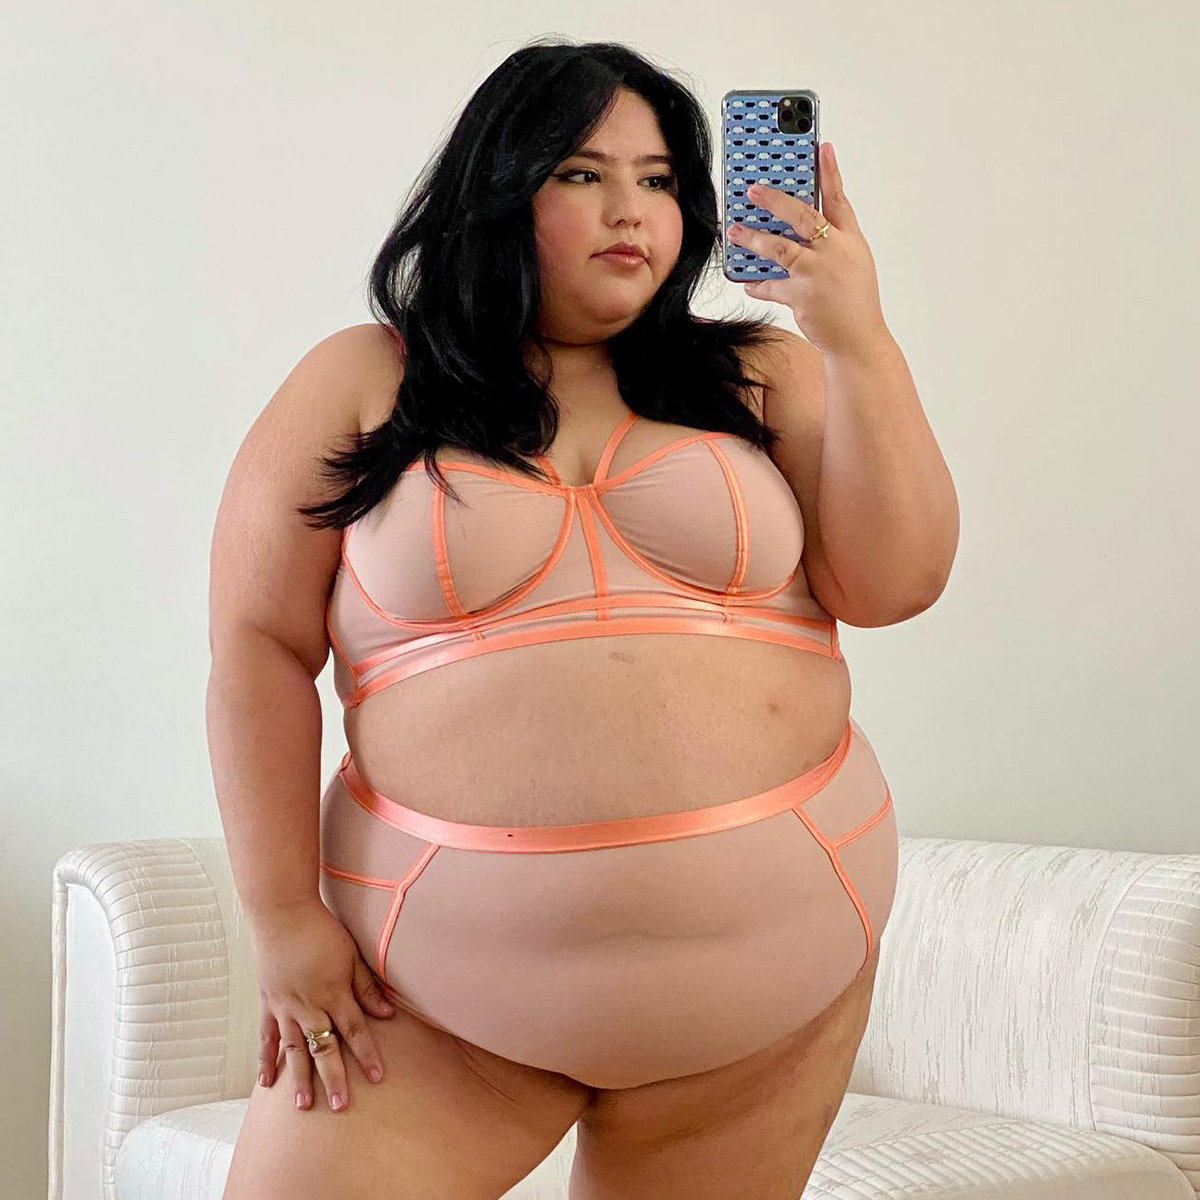 These 5 Plus-Size Lingerie Brands Are Some of My Favorites